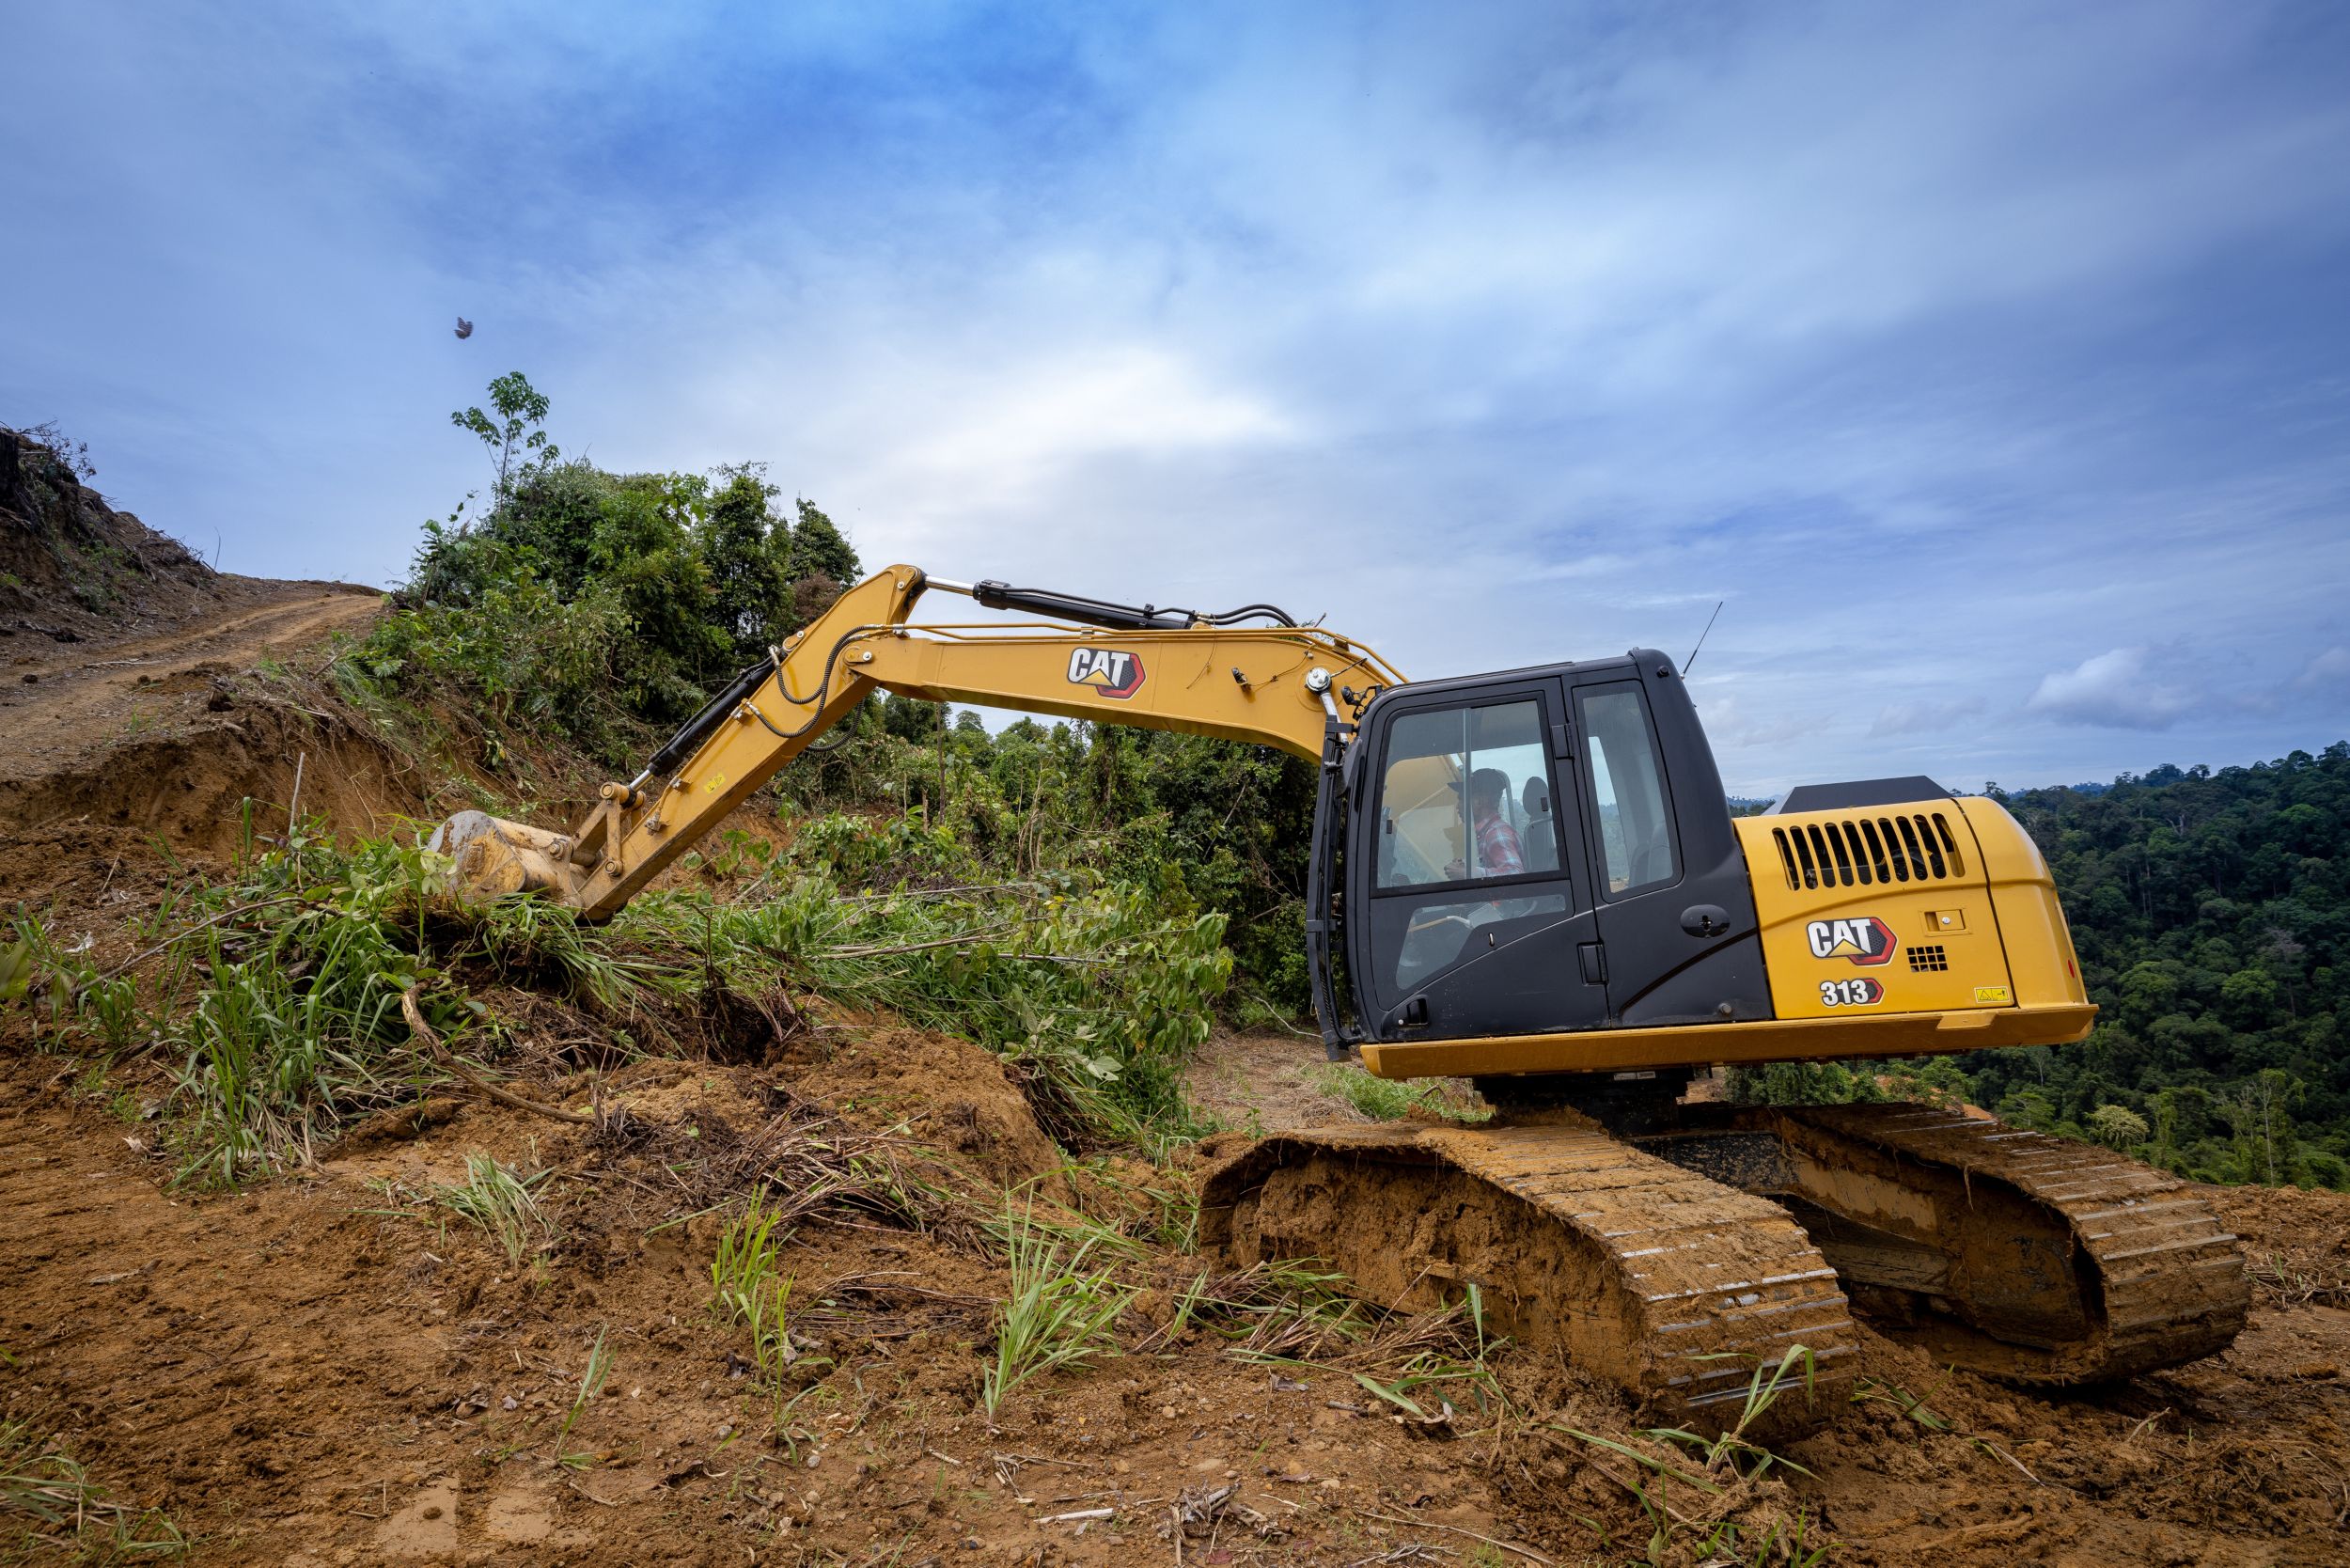 Cat 313 low ground pressure hydraulic trackhoe excavator brings premium power, performance, control, digging, trenching, and heavy lifting capability to your large scale projects.